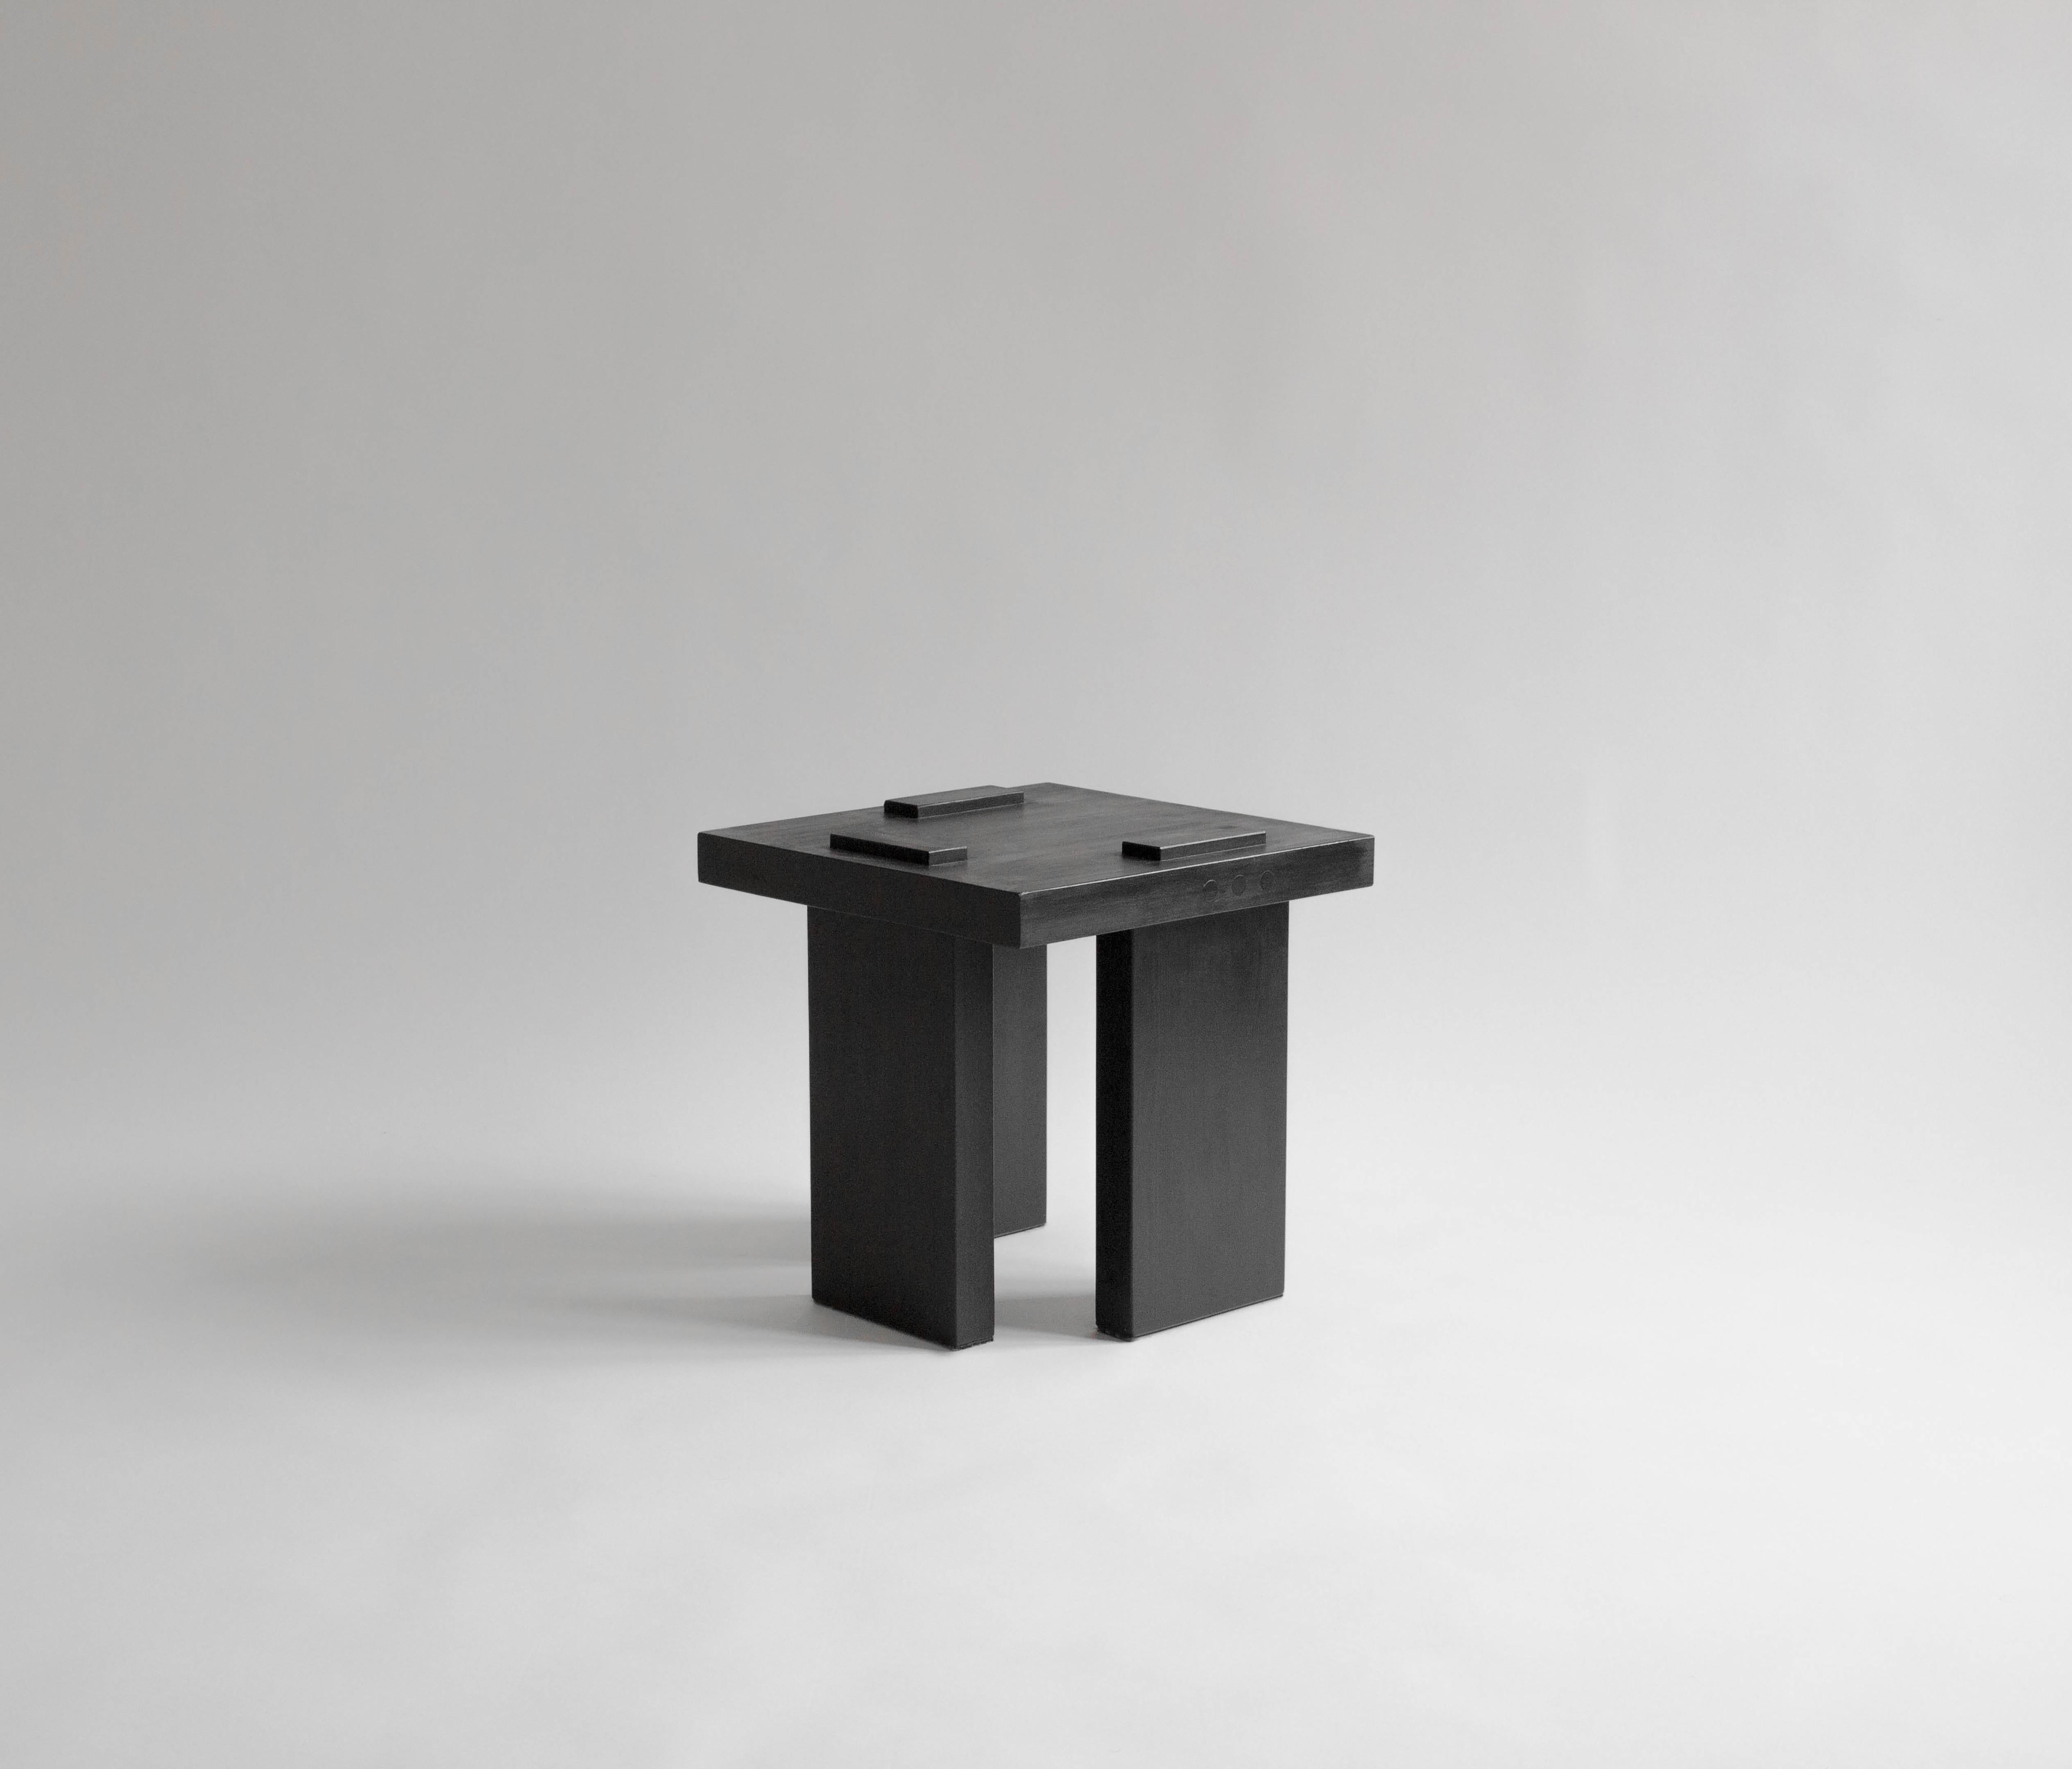 ItooRaba stool by Sizar Alexis
Signed
Dimensions: length 40 x width 40 x height 38cm
 seat height: 42cm

Comes in stained black, white and natural pine

A furniture series that embraces geometrical shapes. Inspired by the passion for